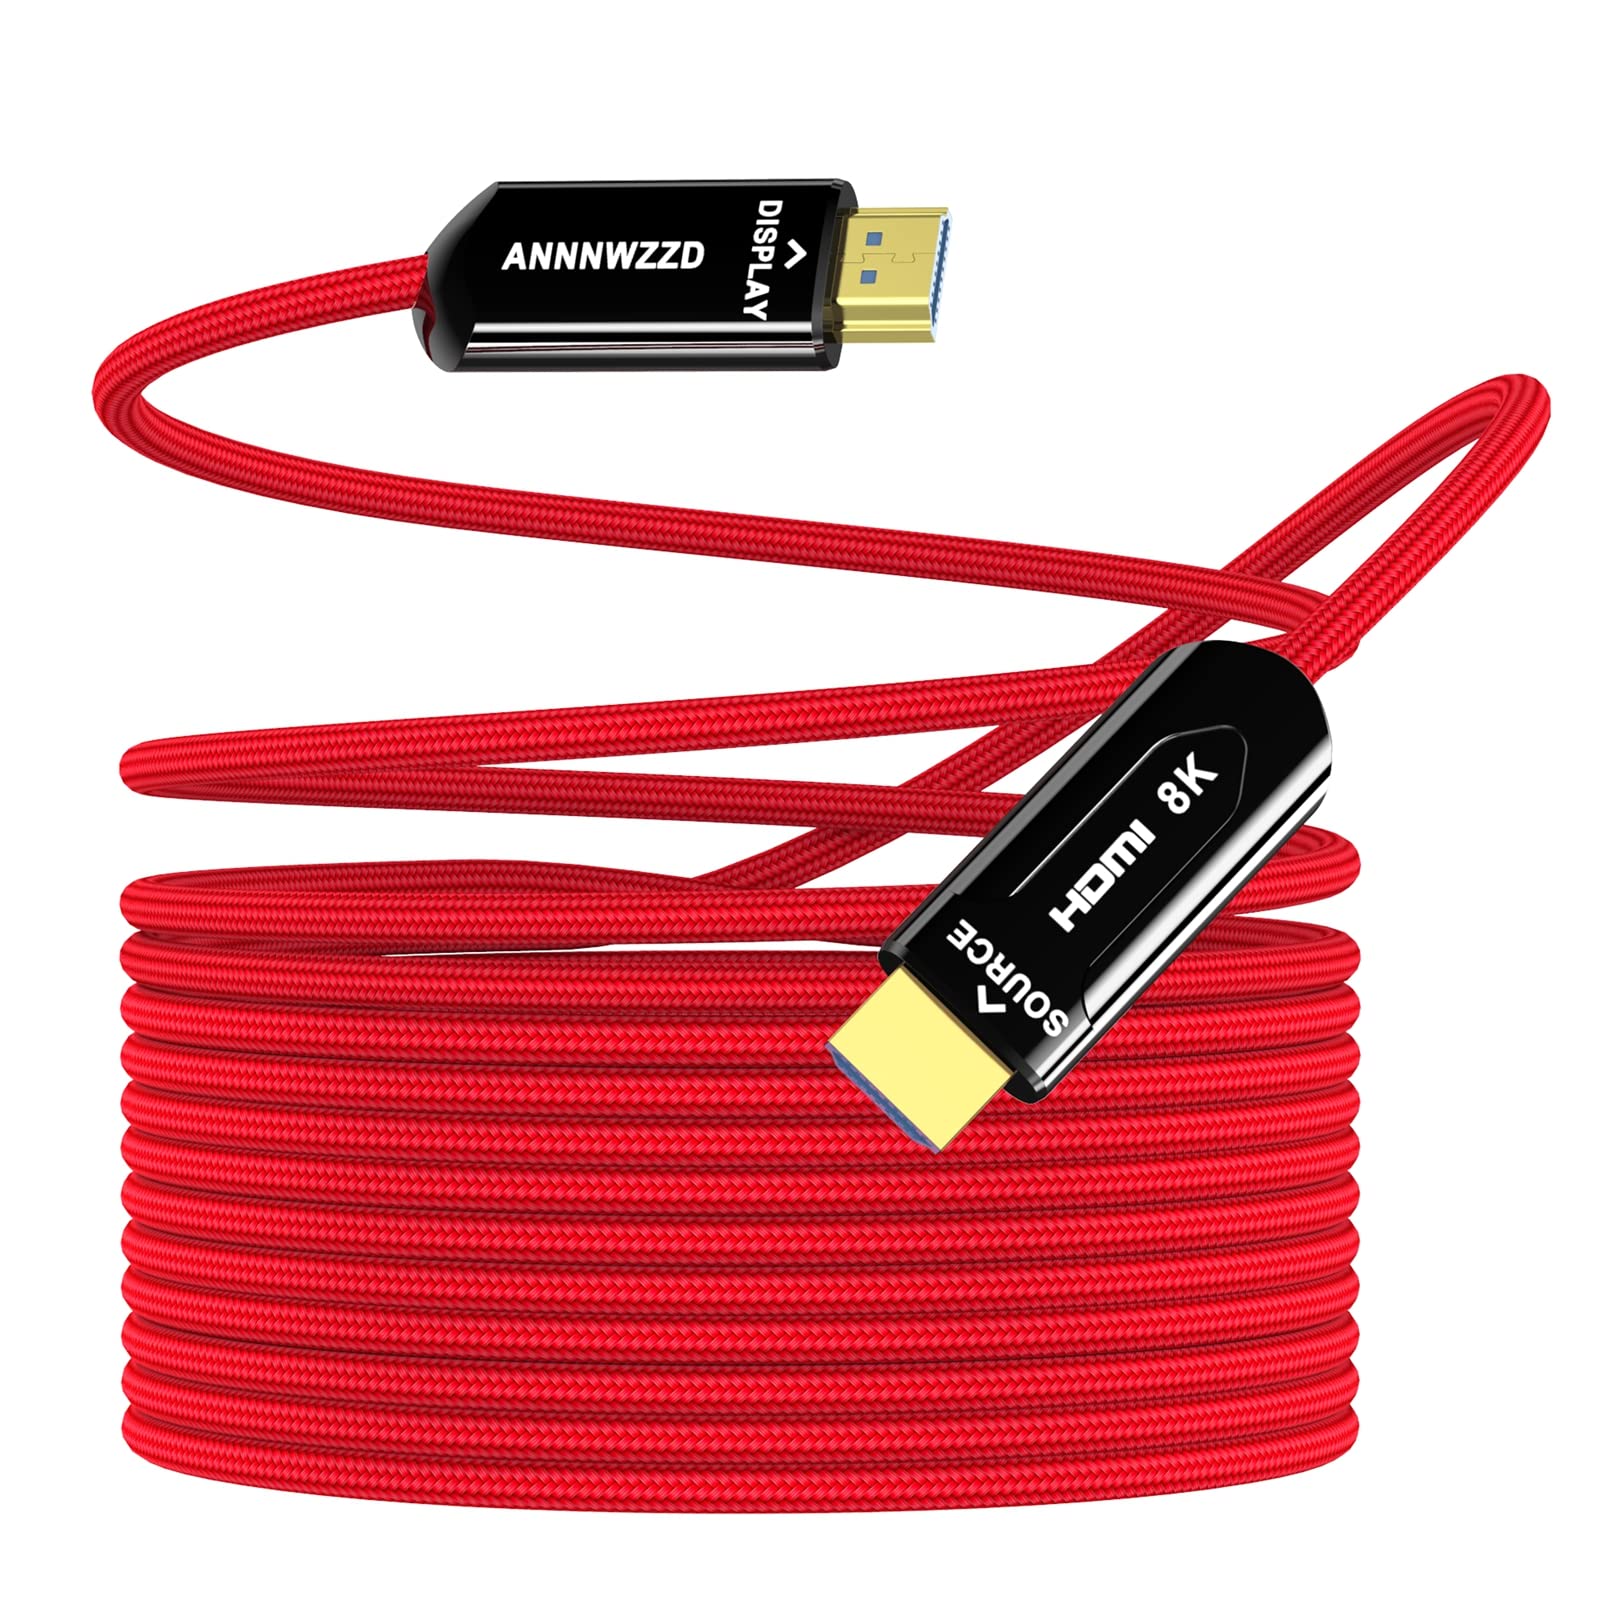 ANNNWZZD 8K HDMI Fiber Optic Cable,8K@60Hz Fiber HDMI 2.1 Braided Cord，Supports 8K@60Hz 4K@120Hz, 48Gbps Dynamic HDR 10, eARC, HDCP2.2, 4:4:4 （Red ...